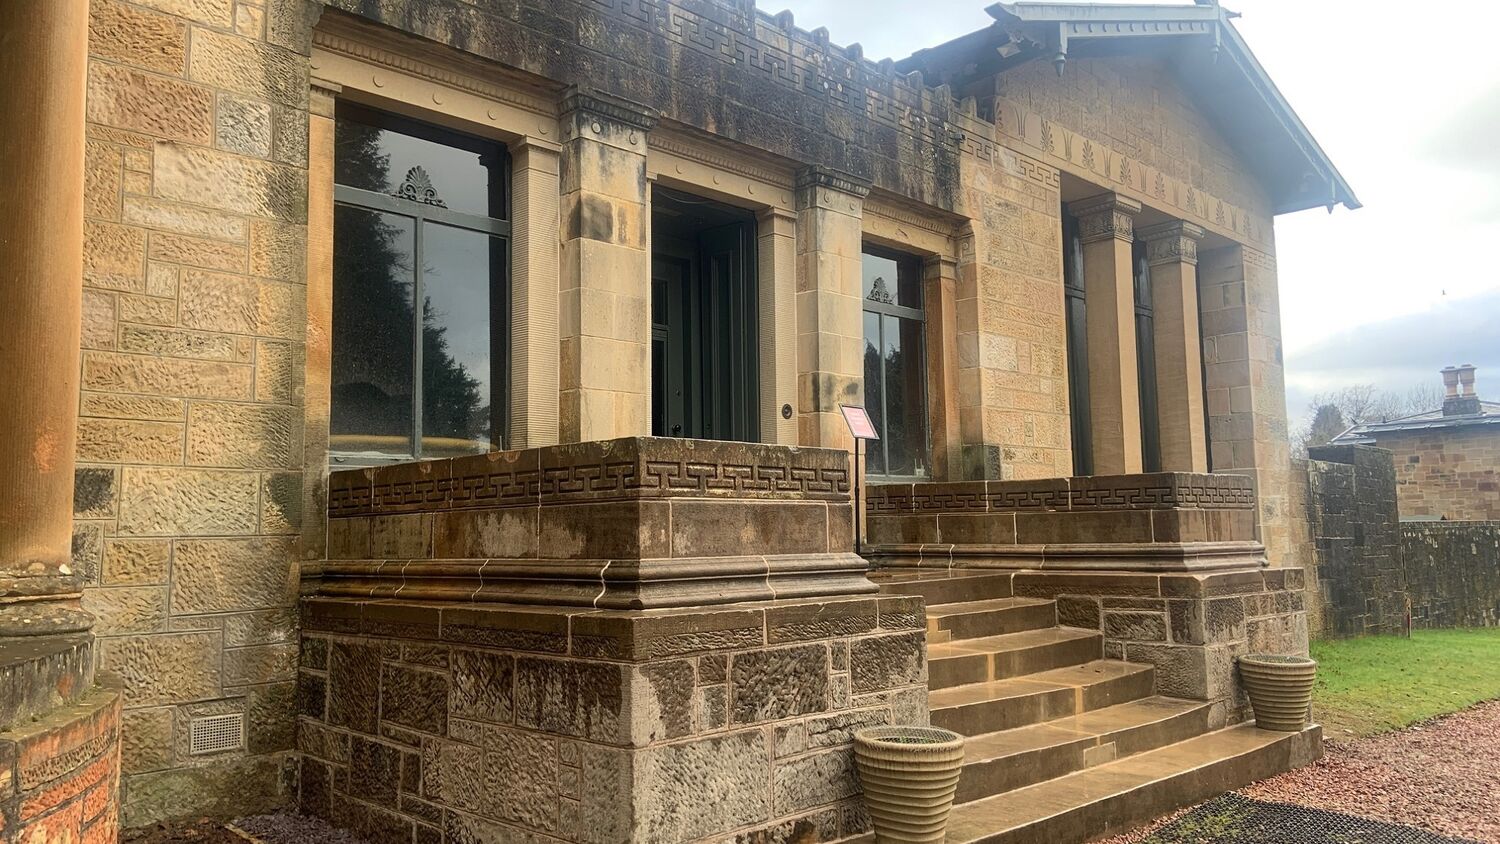 The main entrance to Holmwood on a rather wet day. The stone steps and surrounding walls leading to the front door have recently been cleaned. Two stone urns stand either side of the bottom step.